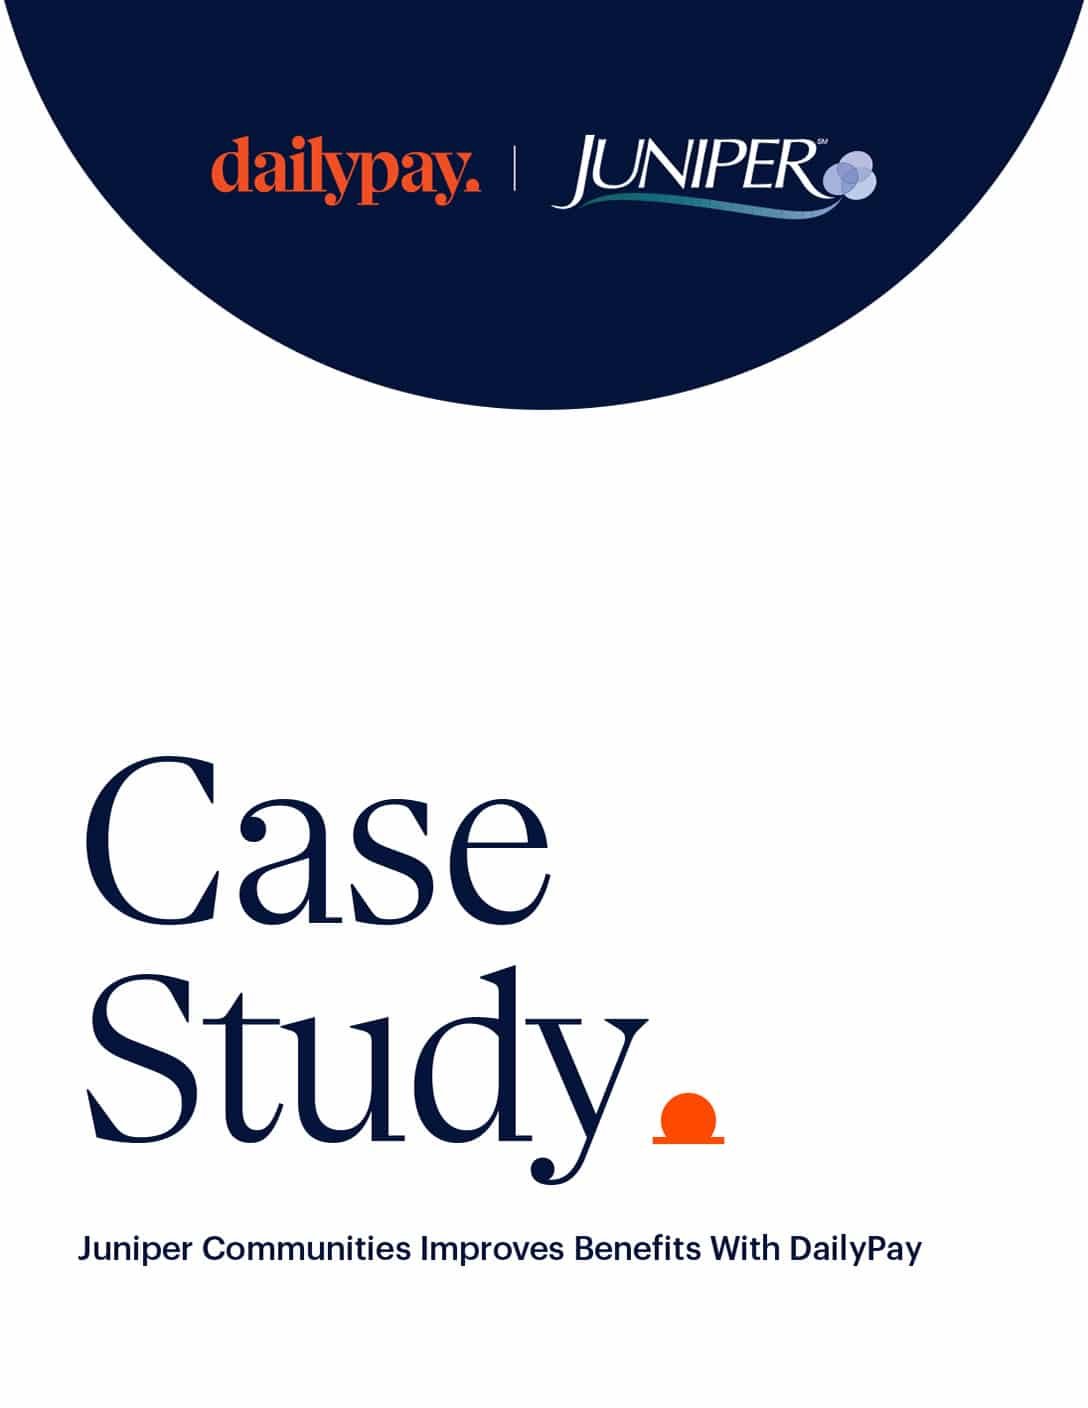 An image featuring logos and text. At the top, there is a dark blue circle containing the "dailypay" and "JUNIPER" logos. Below the circle, large text reads "Case Study." Smaller text beneath states, "Juniper Communities Improves Benefits With DailyPay" with an orange icon of a sun setting or rising.